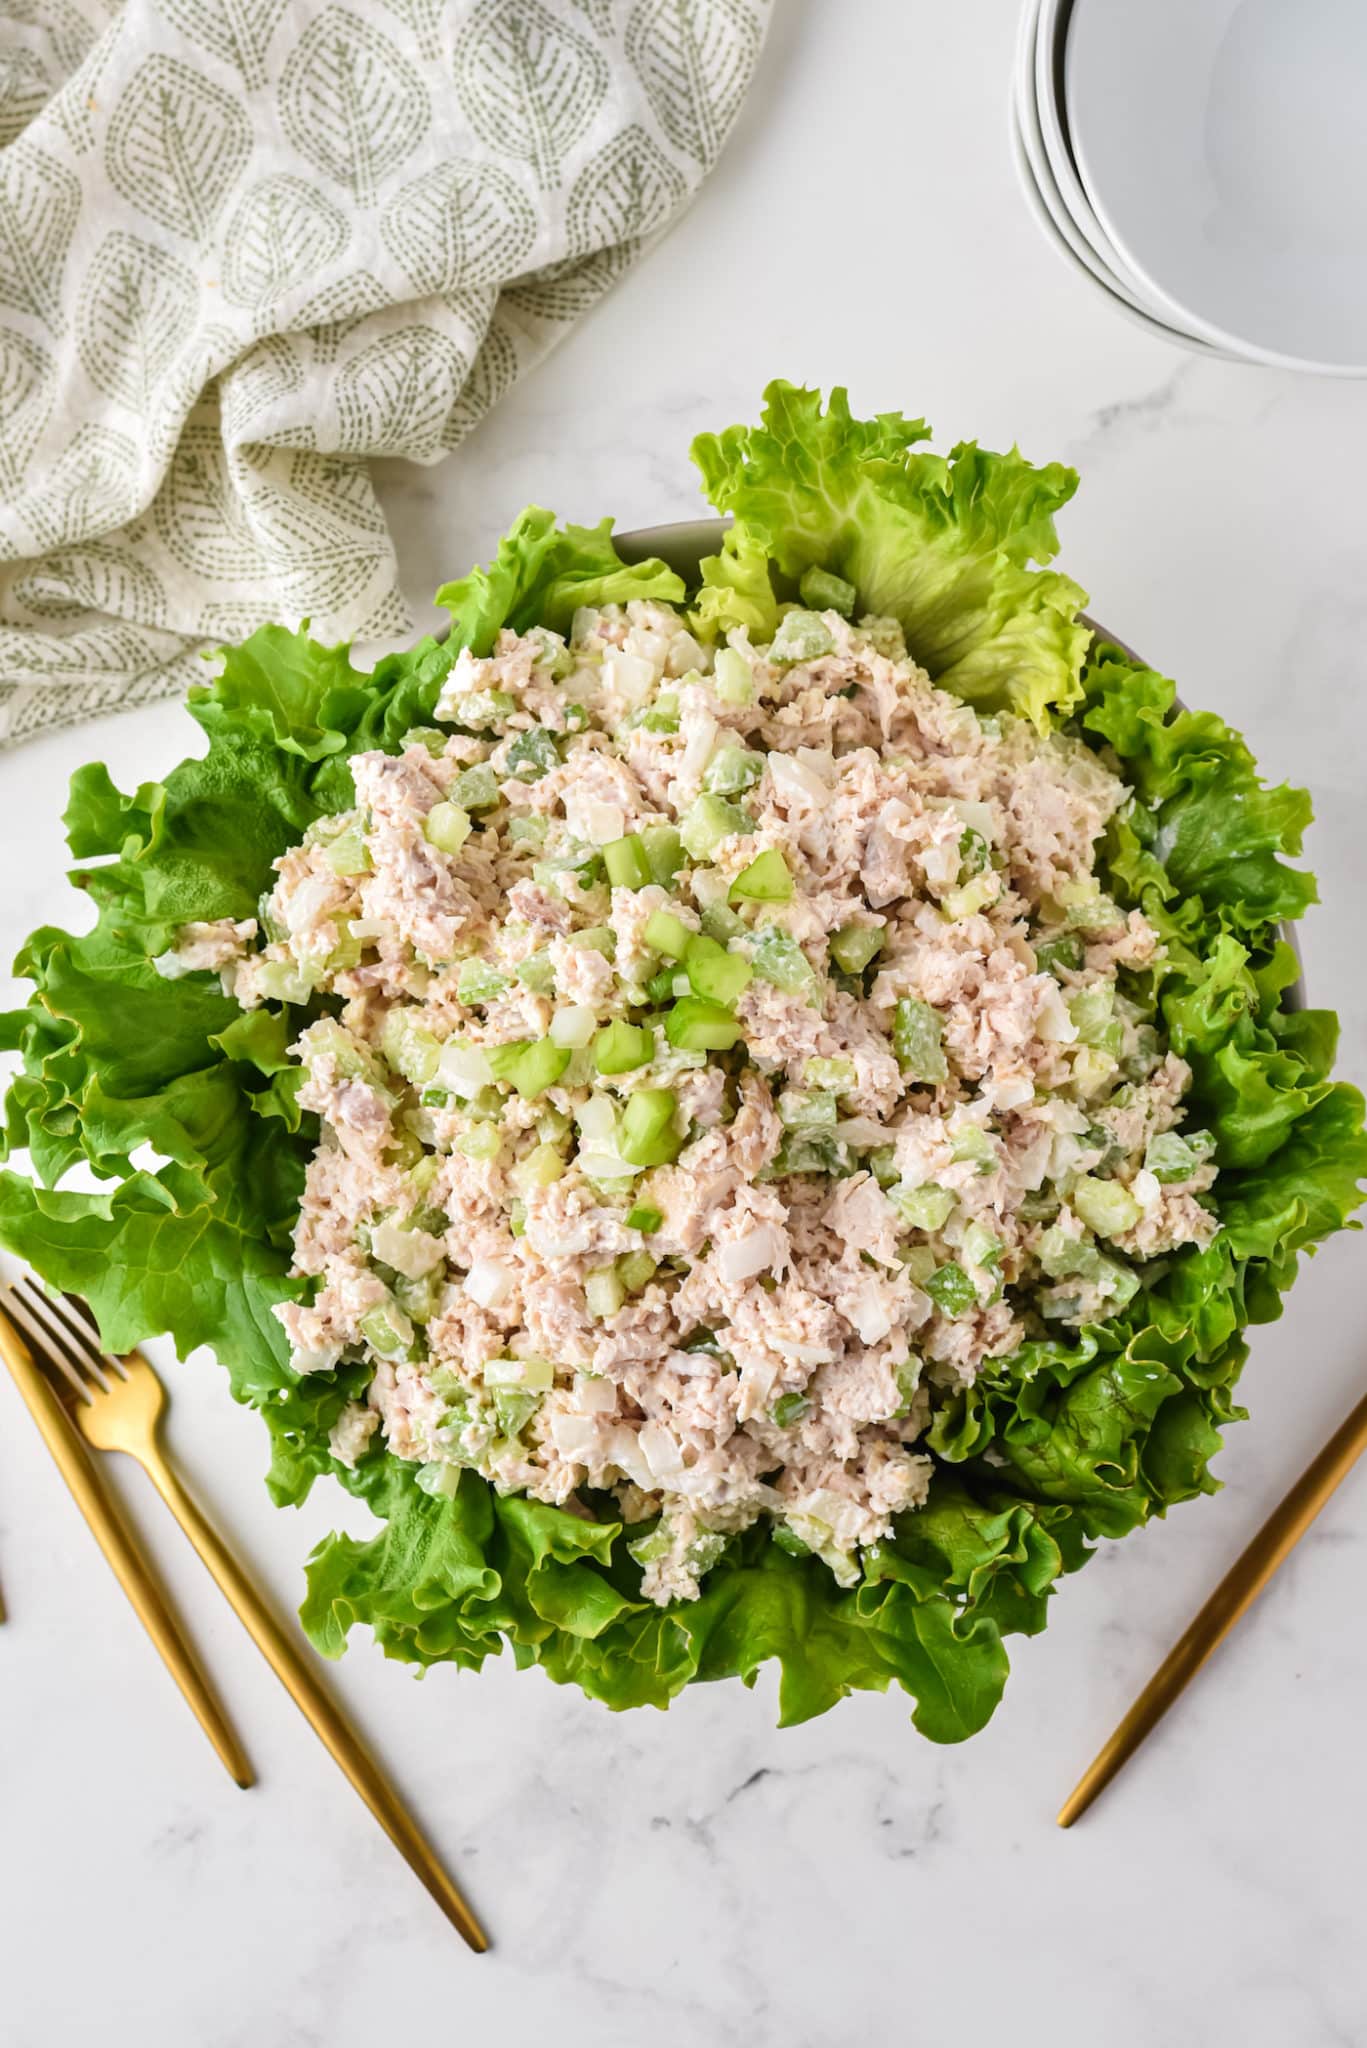 Top down view of a large serving bowl of green lettuce topped with chicken salad.